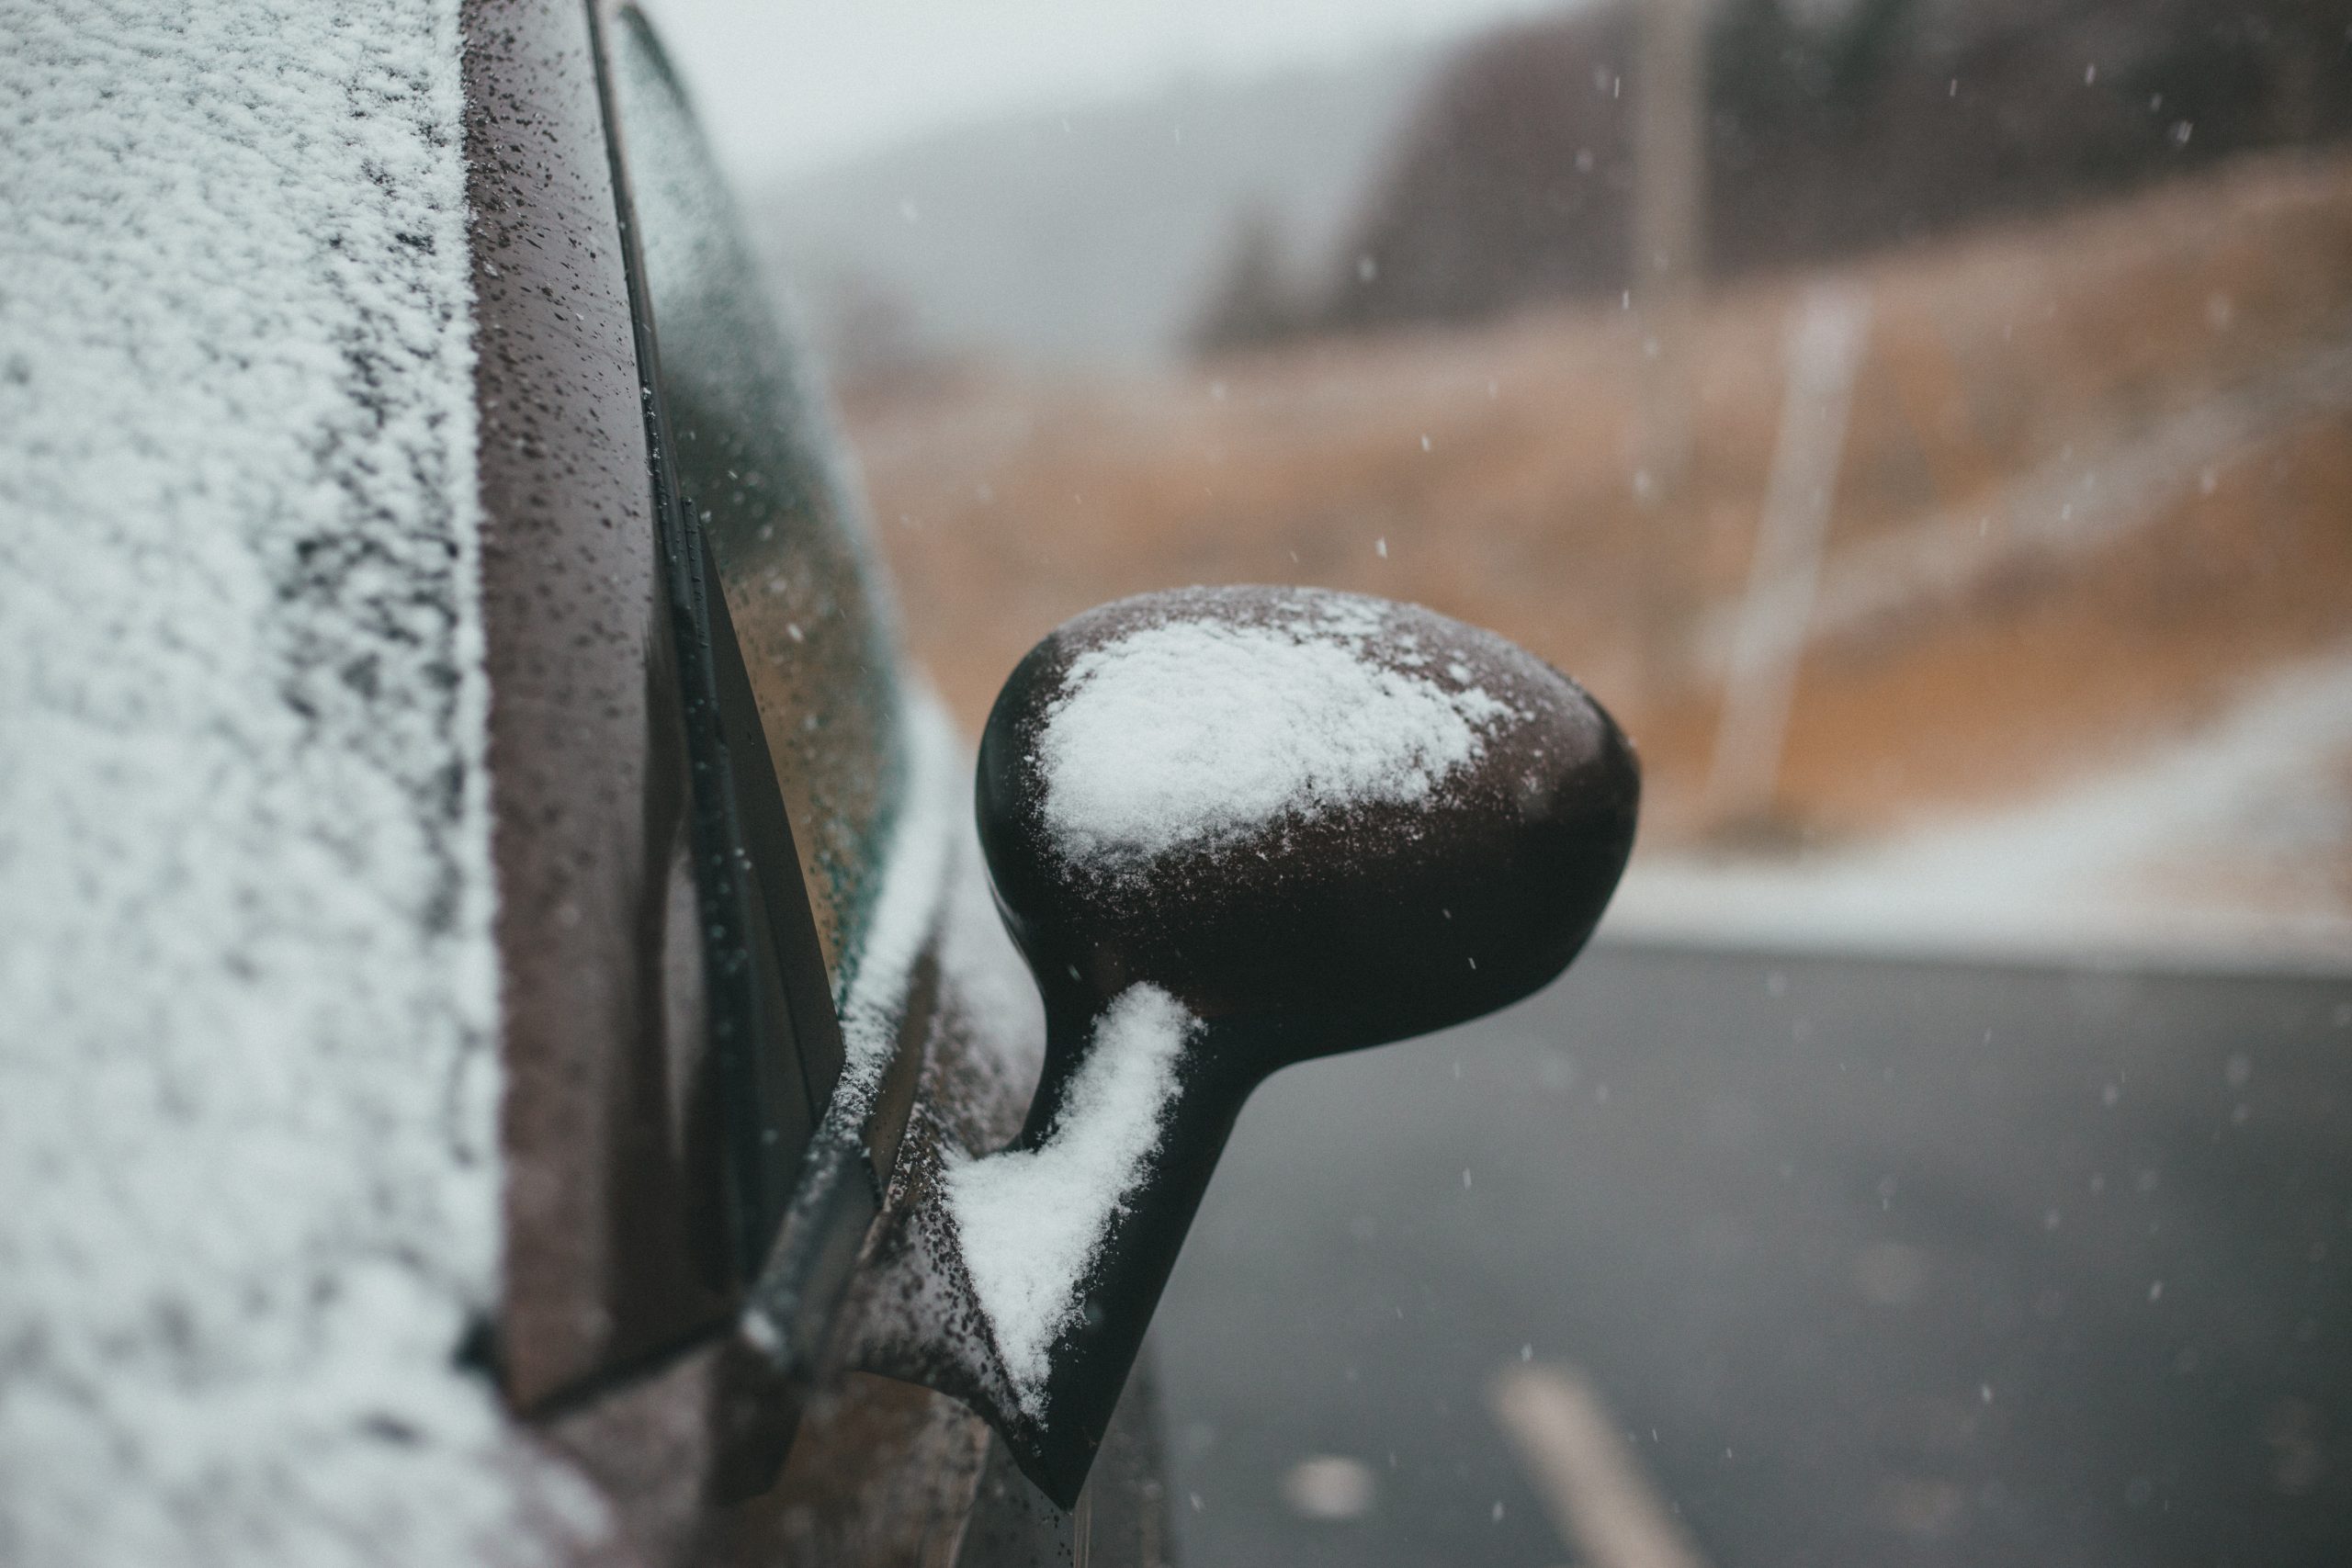 Windshield de-icer put to the test 